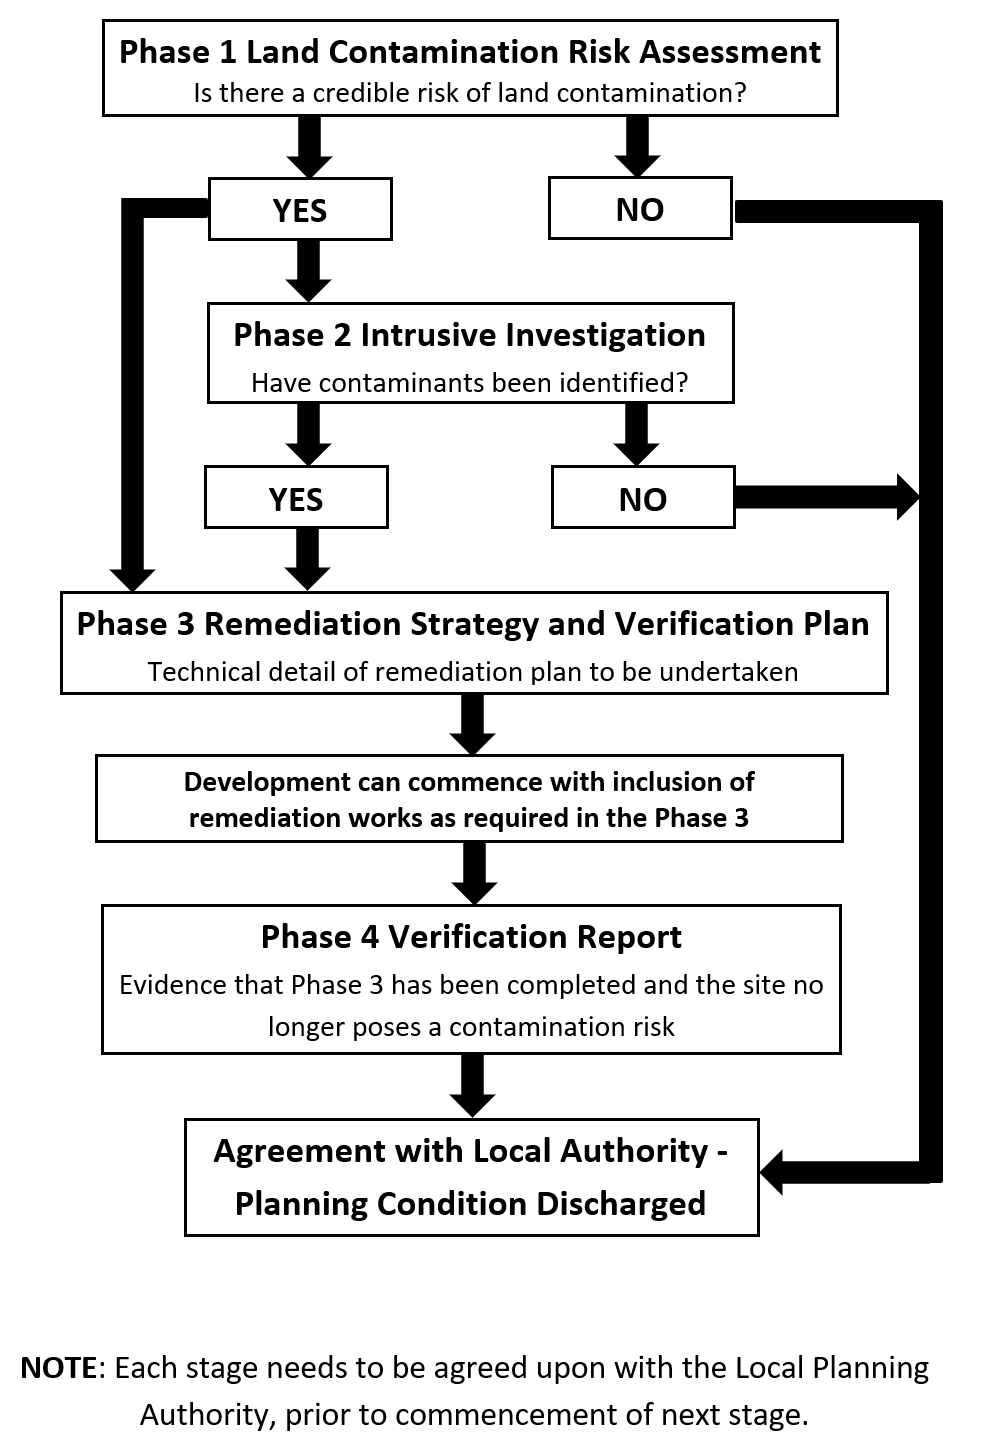 Process flow diagram of the phases of investigation